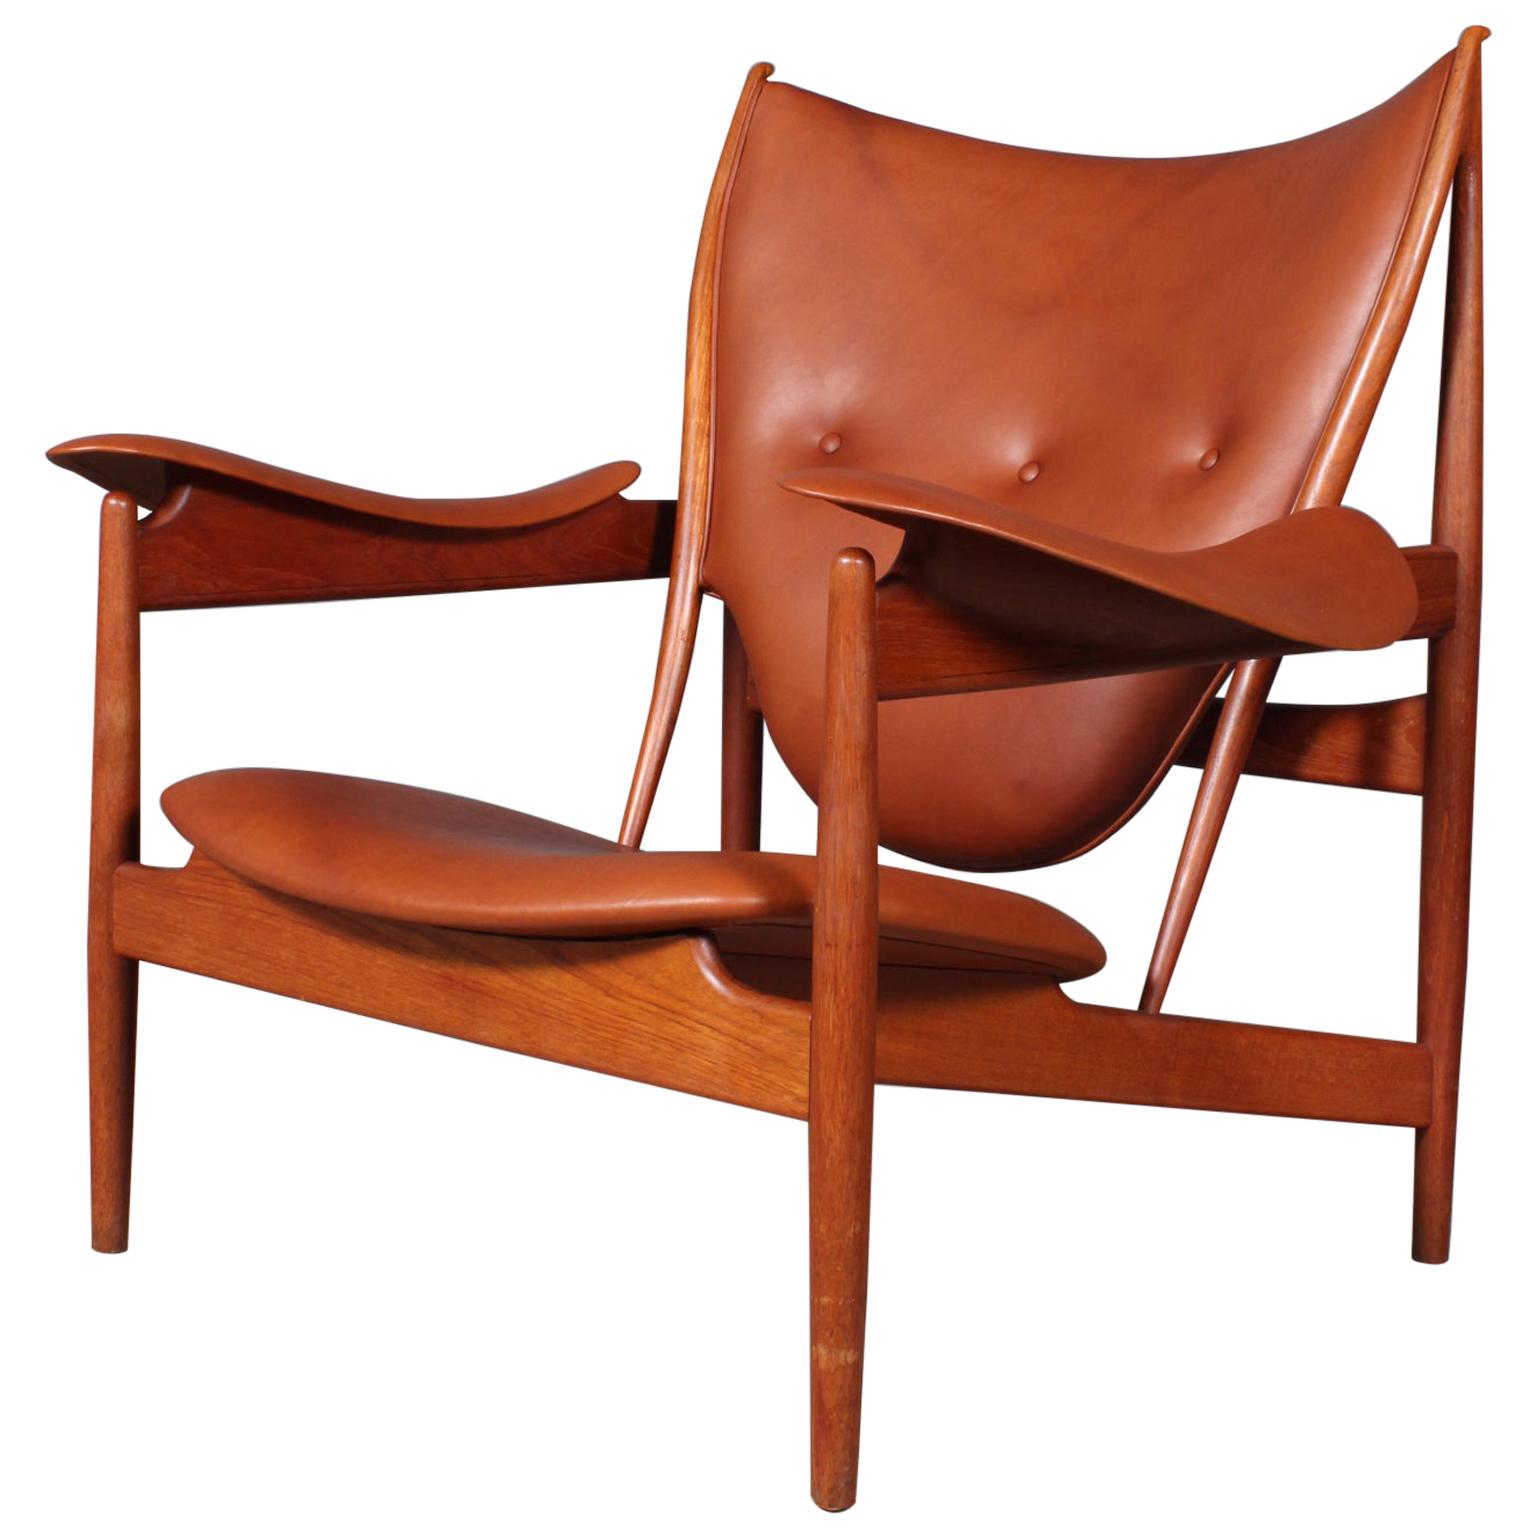 1950s Teak and Tan Leather Chieftain's Chair by Finn Juhl